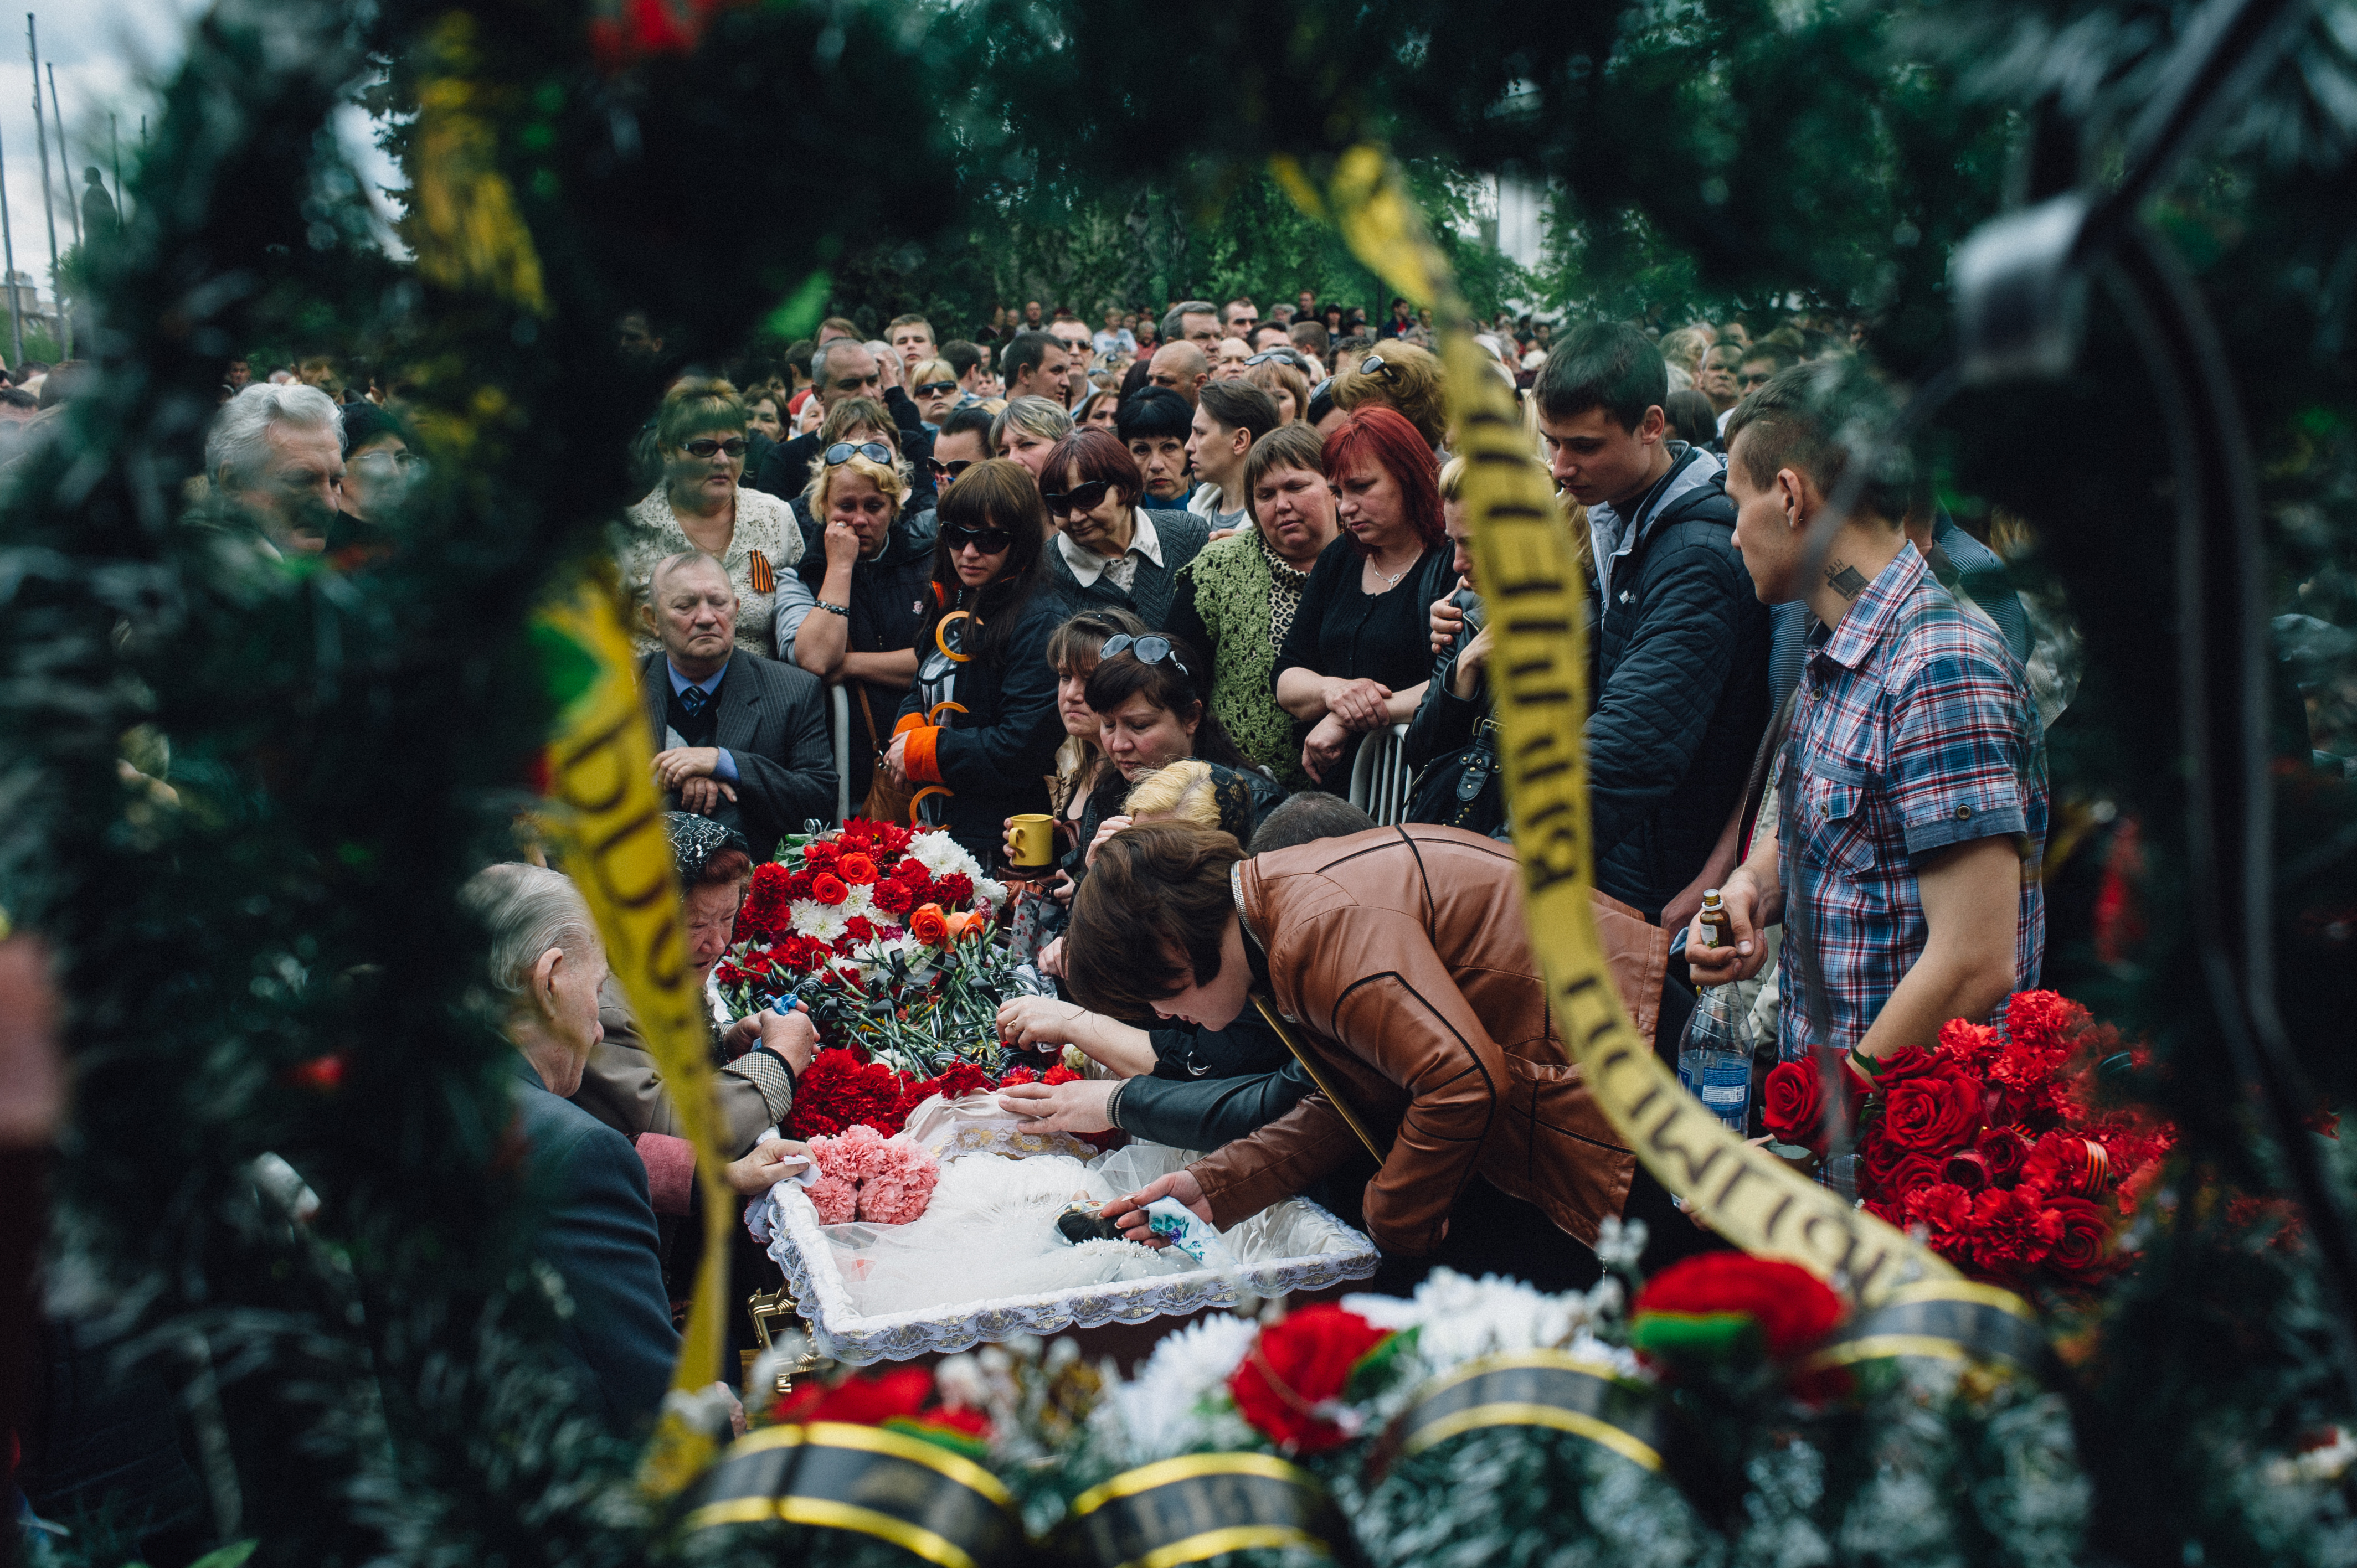 Parents and relatives mourn a pro-Russian medical worker, in Kramatorsk, Ukraine on May 5, 2014 